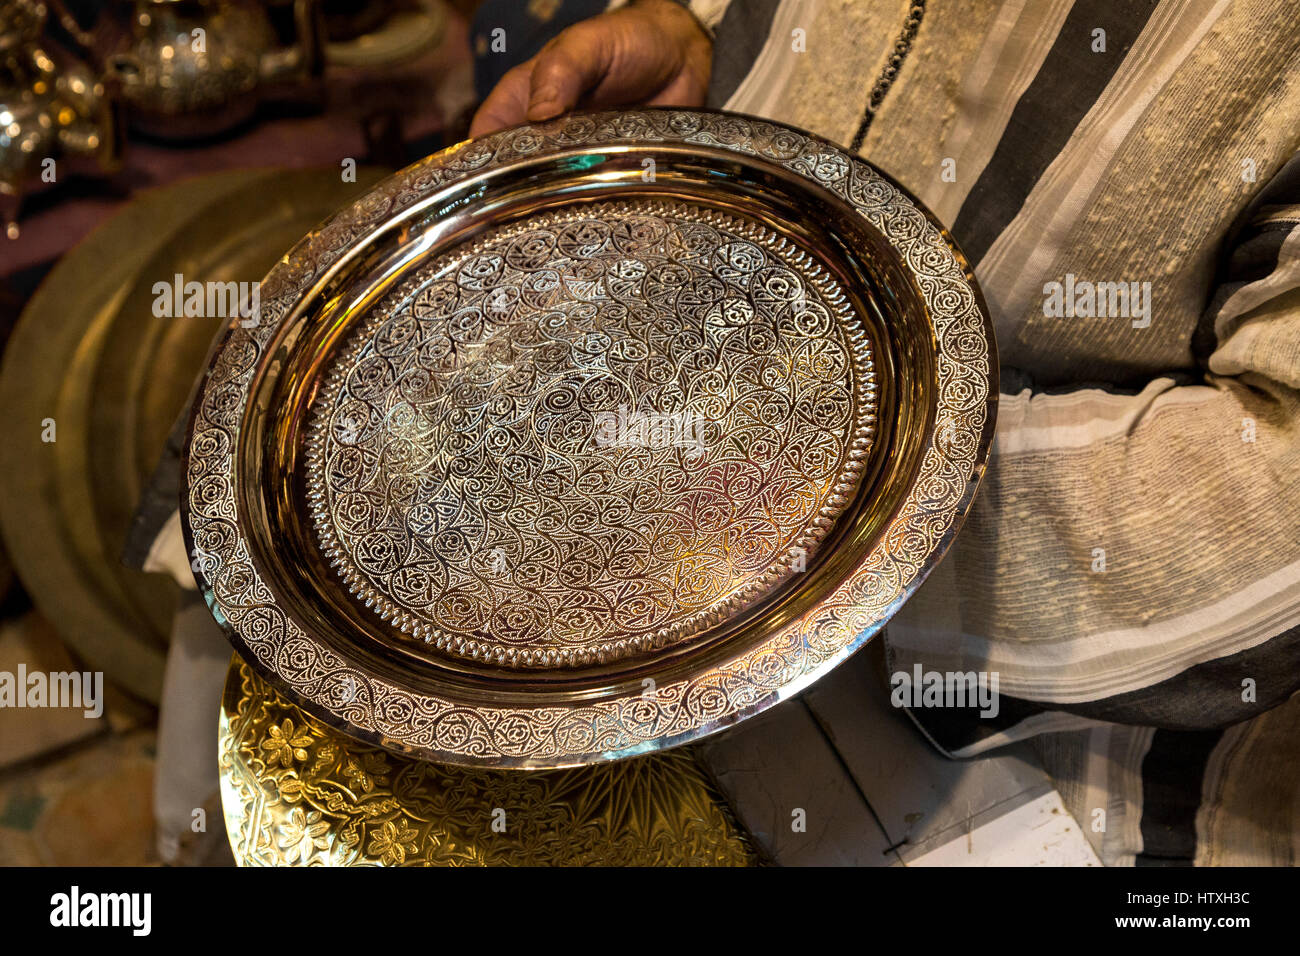 Fes, Morocco.  Tray with Metalworker's Design. Stock Photo